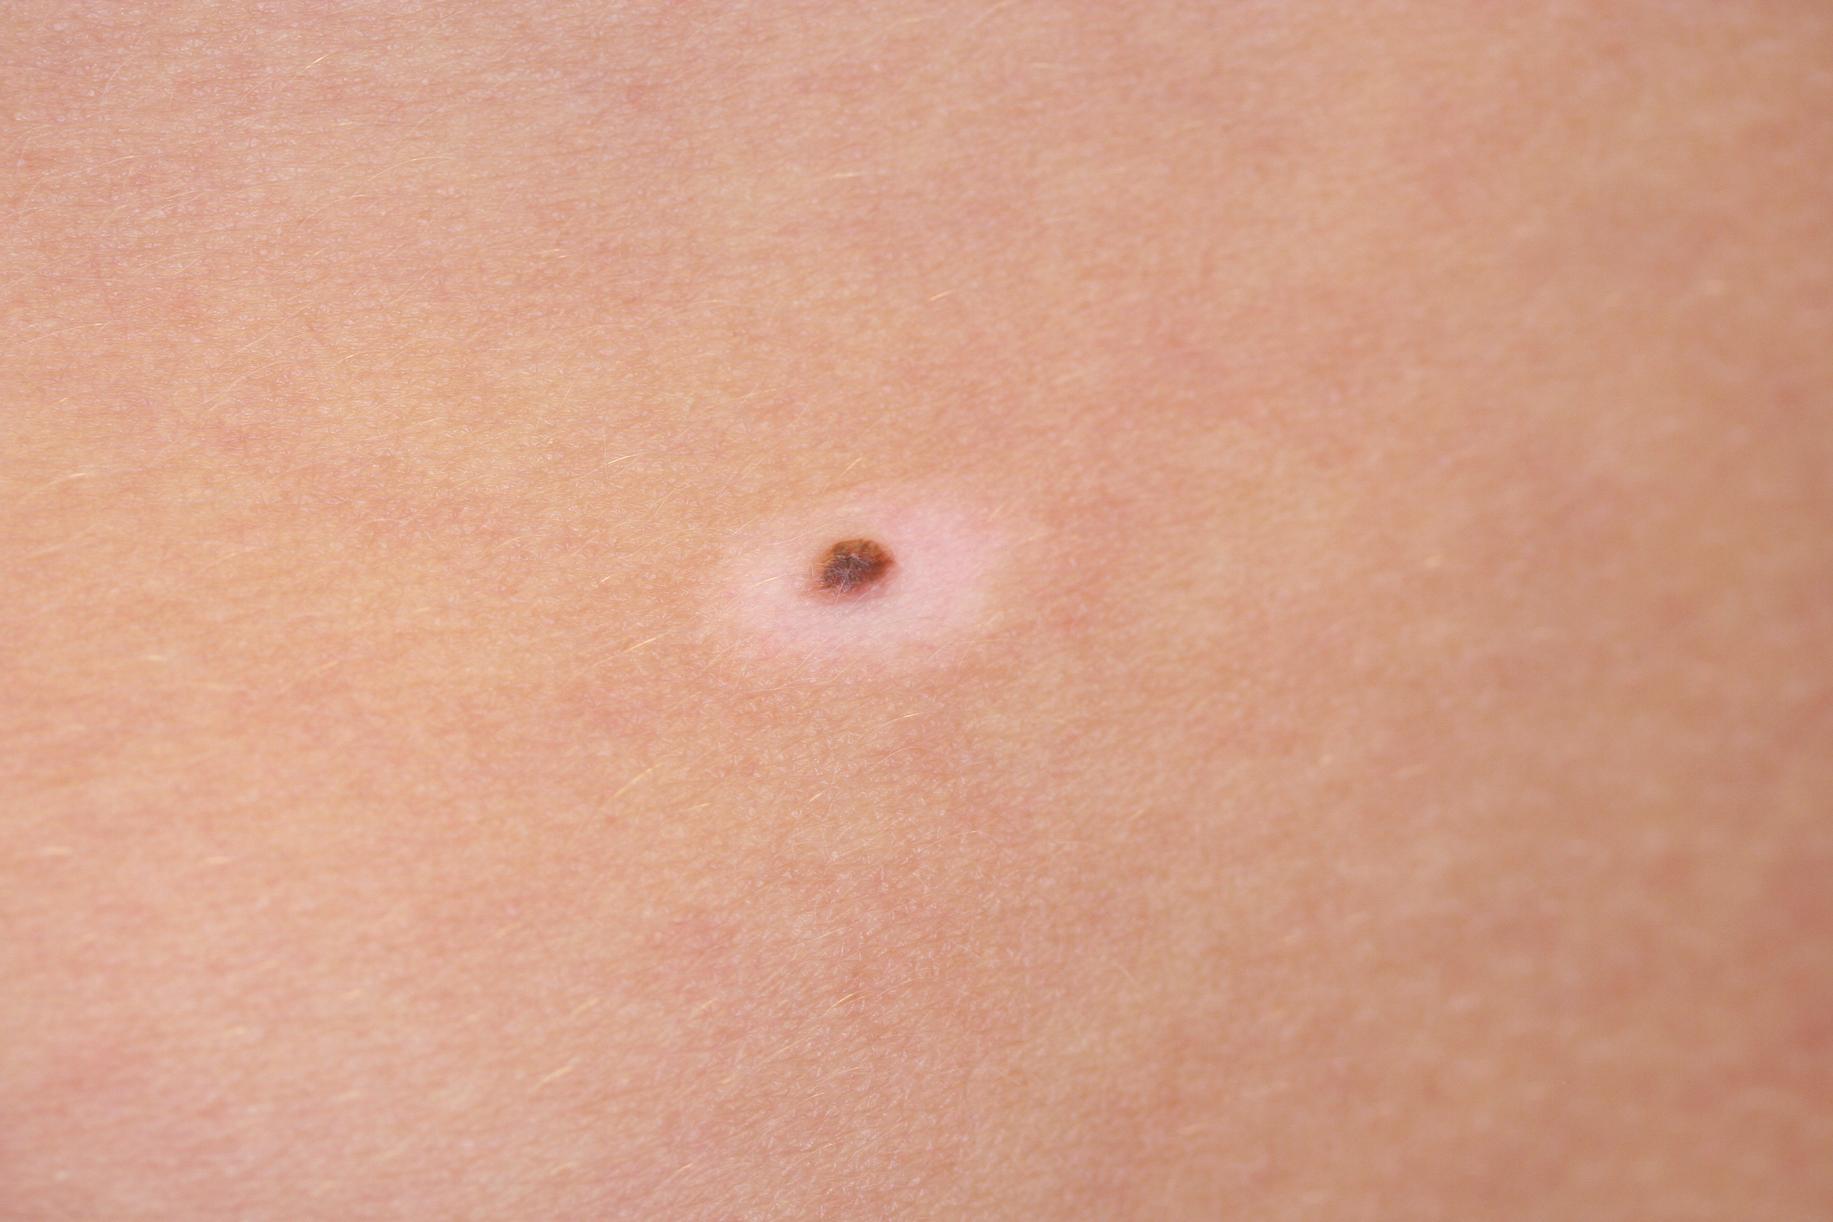 Fig. 70.3, The classic appearance of a halo nevus. These small pigmented lesions are surrounded by a rim of hypopigmentation. They are typically seen in adolescents and are most commonly located over the trunk, especially on the back. Treatment is usually not needed unless the pigmented portion of the halo nevus appears atypical. In that case, excision of the entire lesion, including the halo, is recommended.